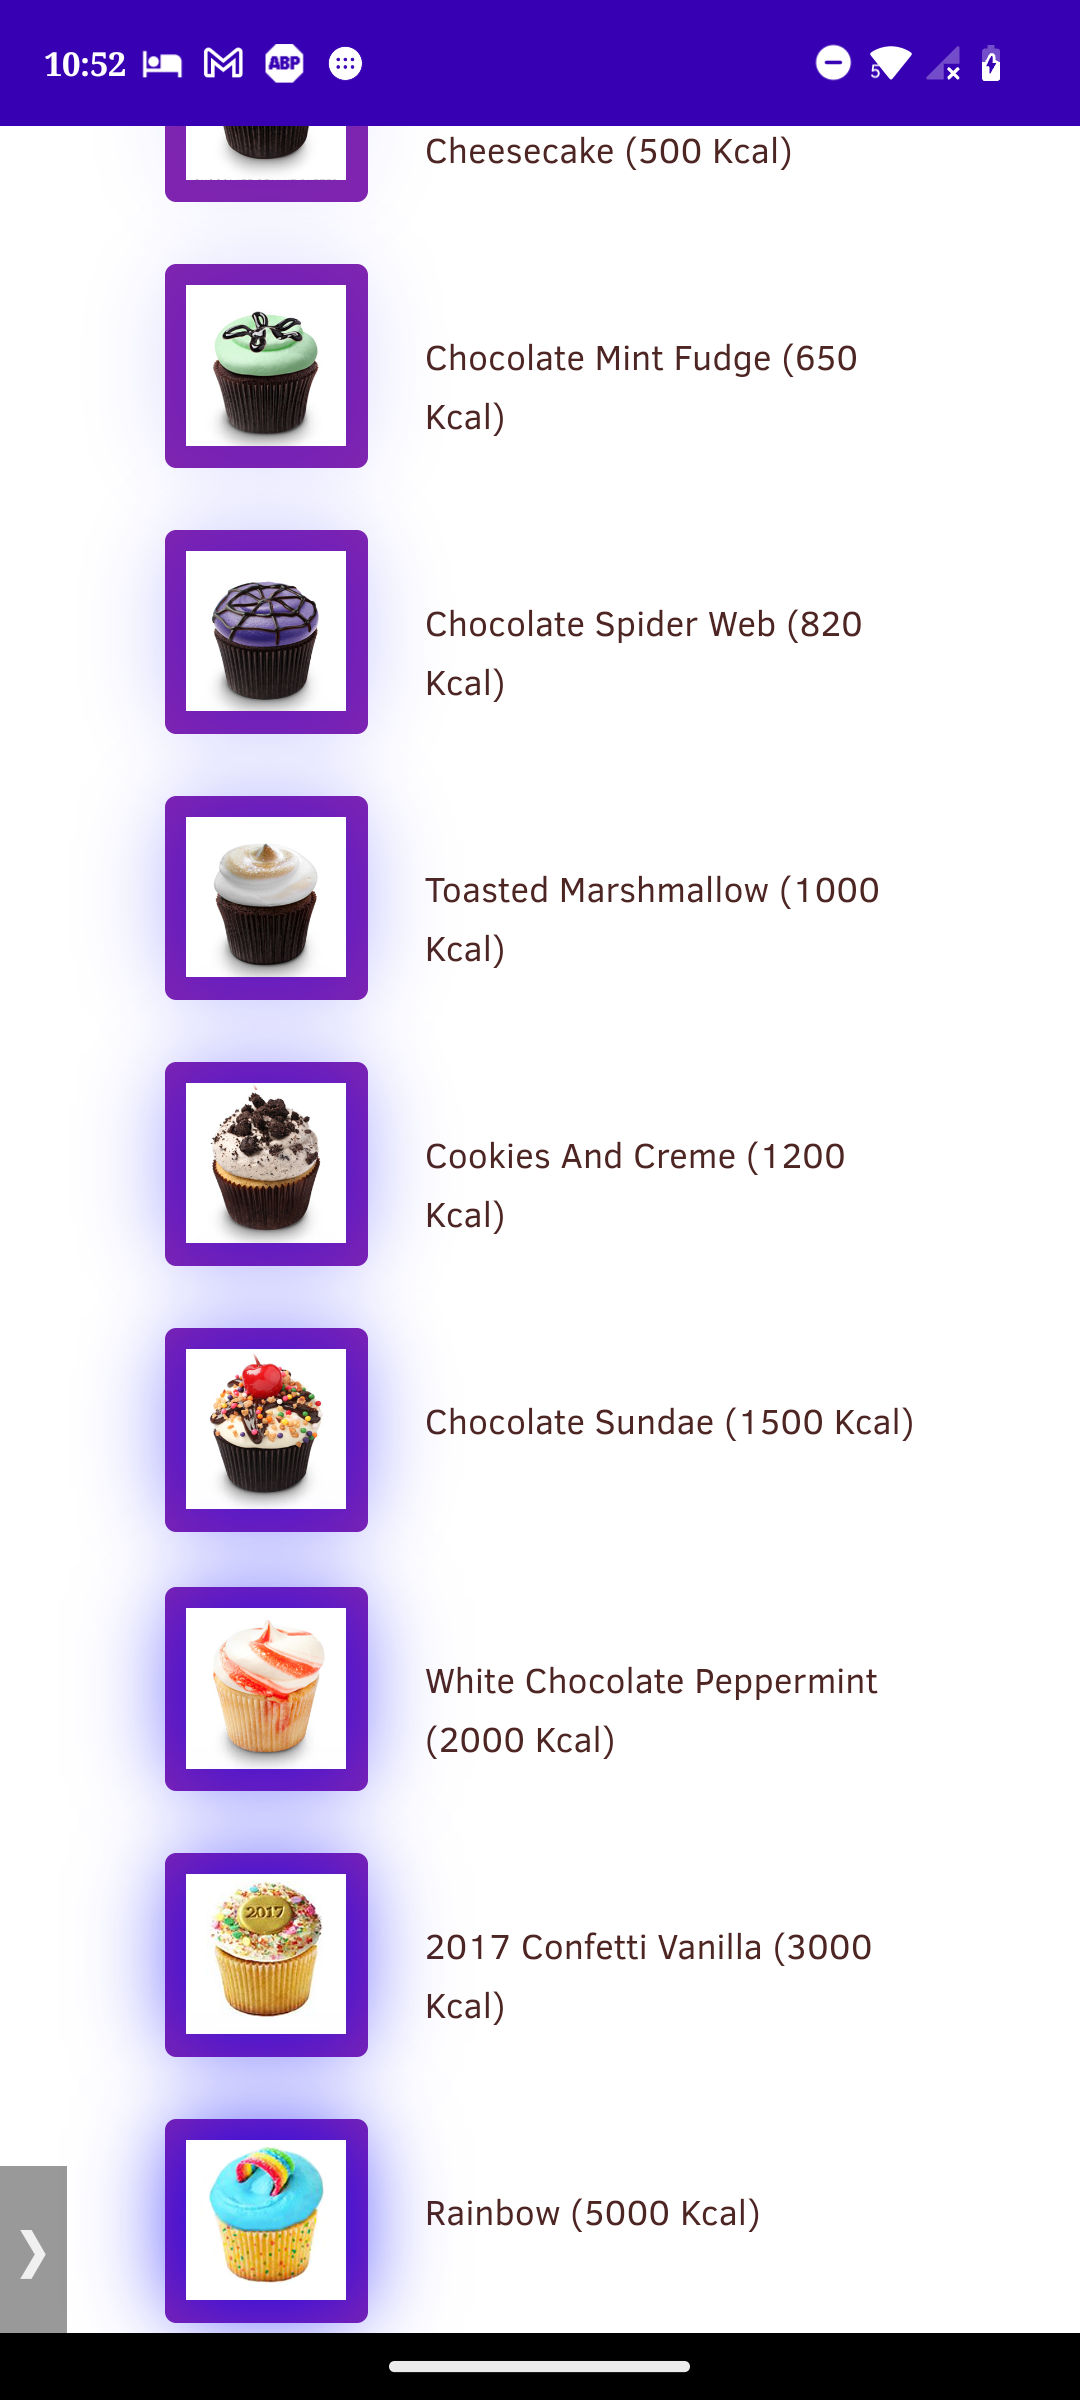 2048 cup cakes – Apps on Google Play